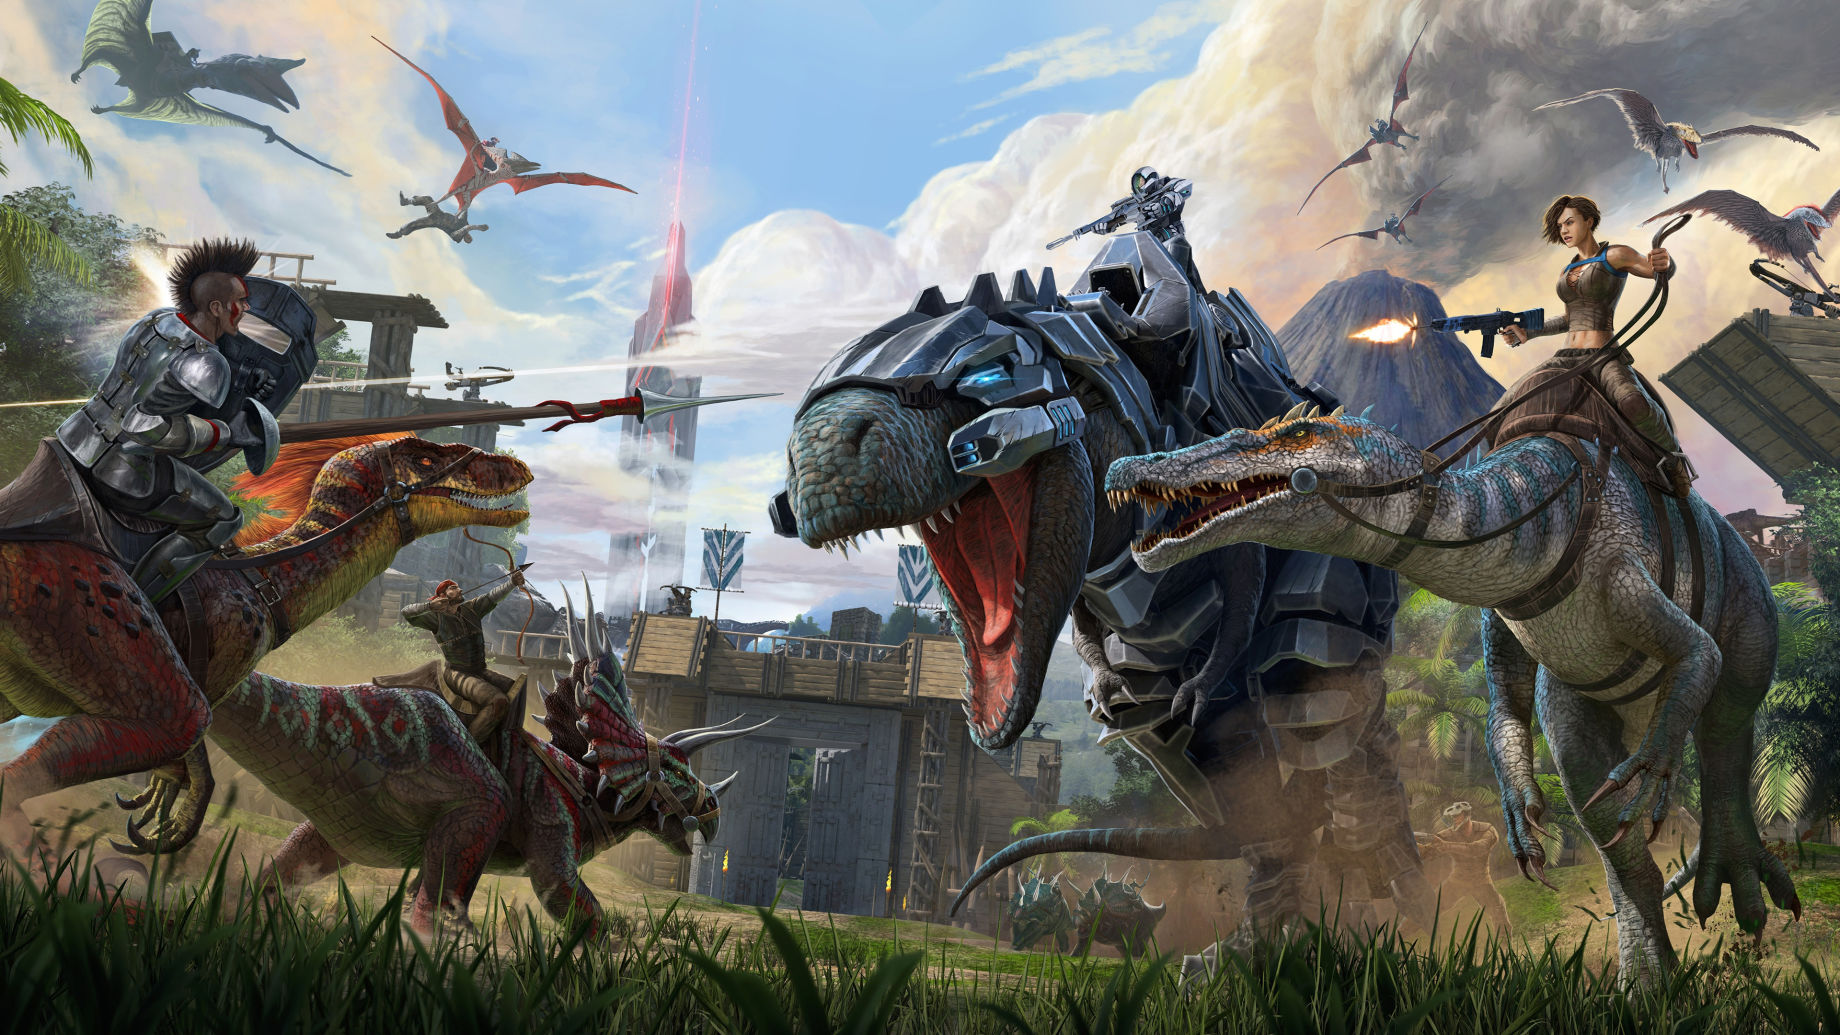 Ark 2: release date speculation, platforms, trailers, gameplay